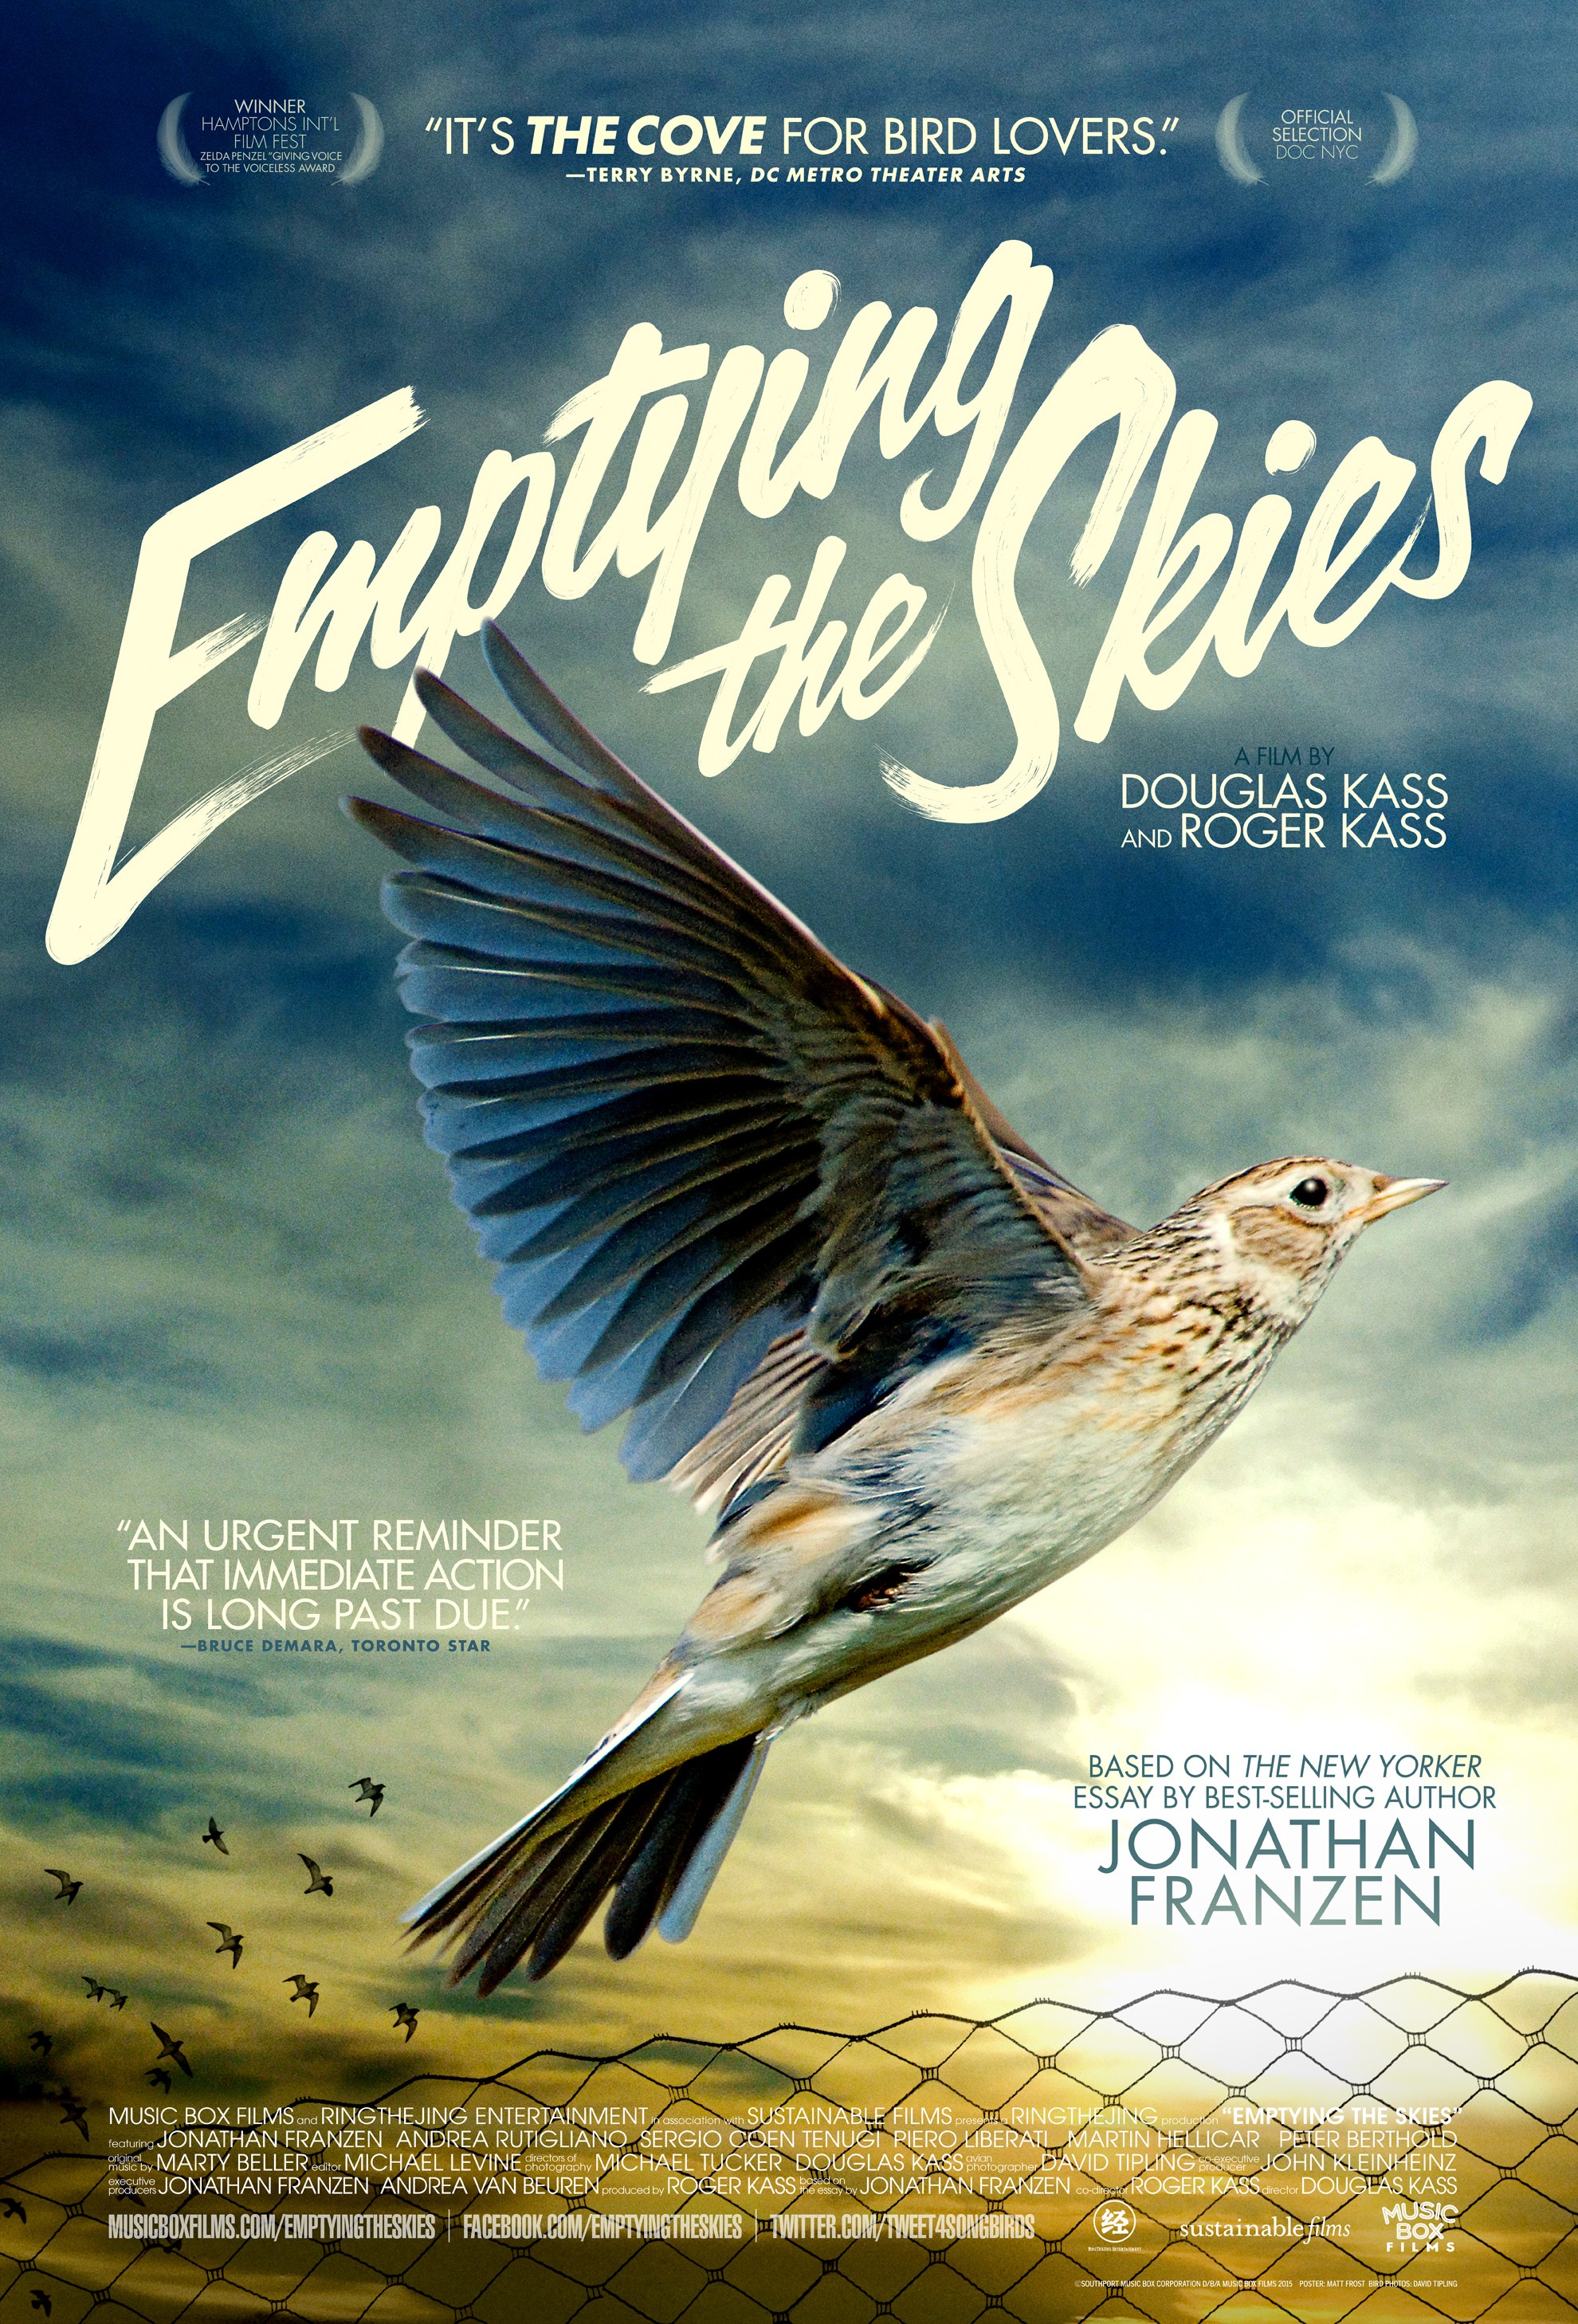 Mega Sized Movie Poster Image for Emptying the Skies 